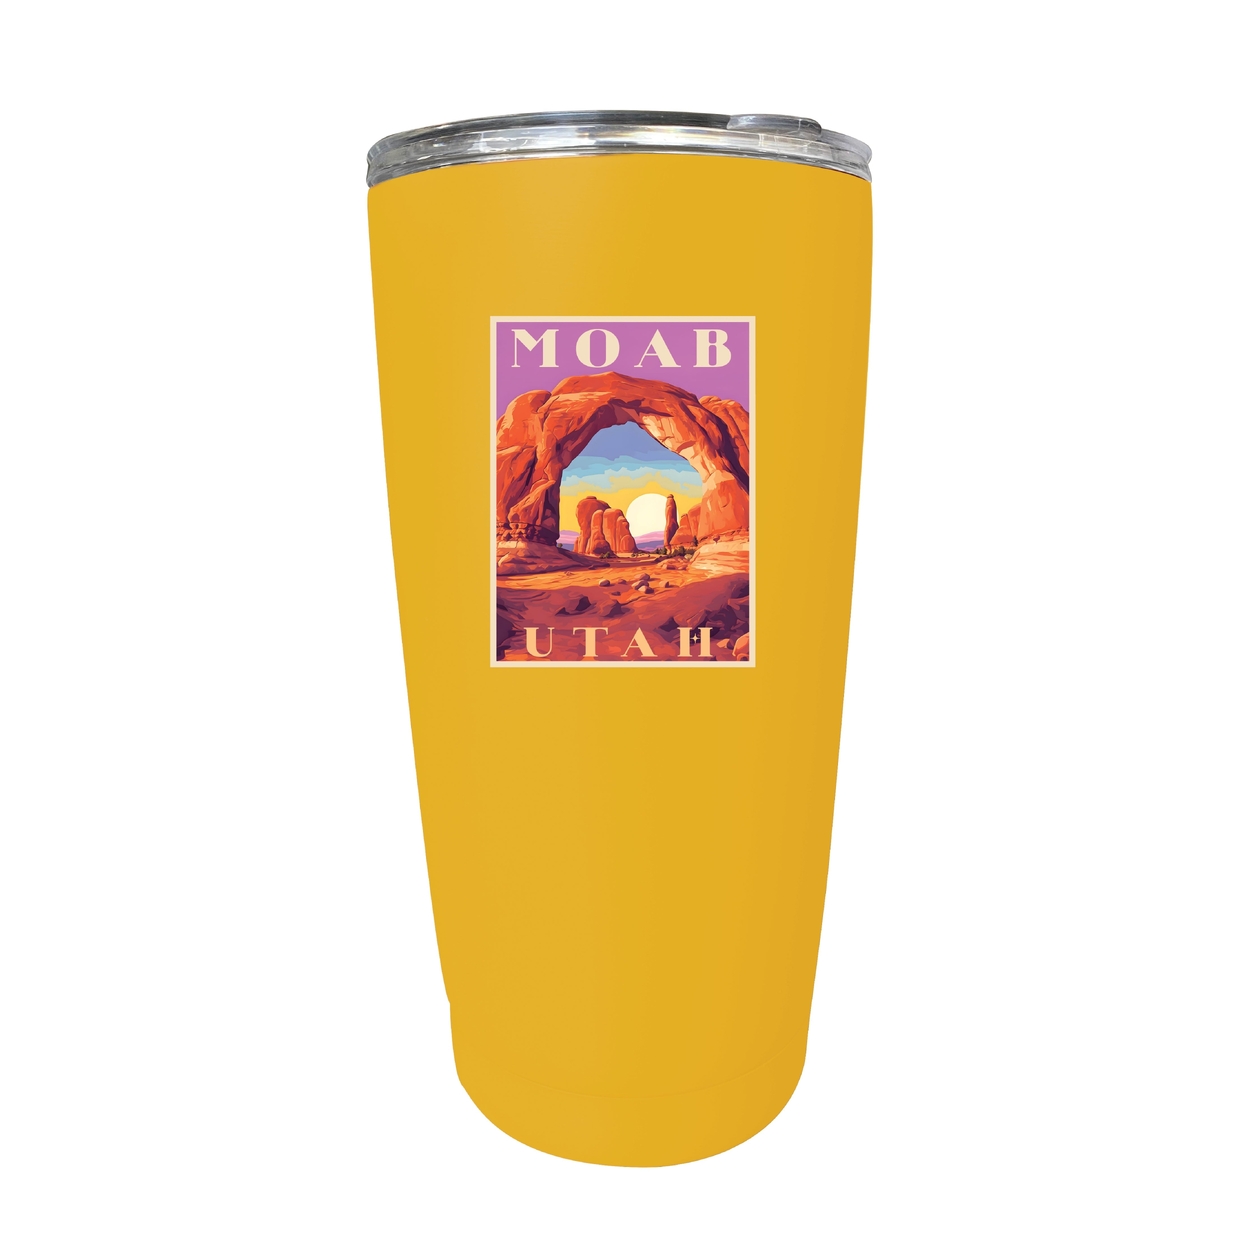 Moab Utah Souvenir 16 Oz Stainless Steel Insulated Tumbler - Yellow,,4-Pack